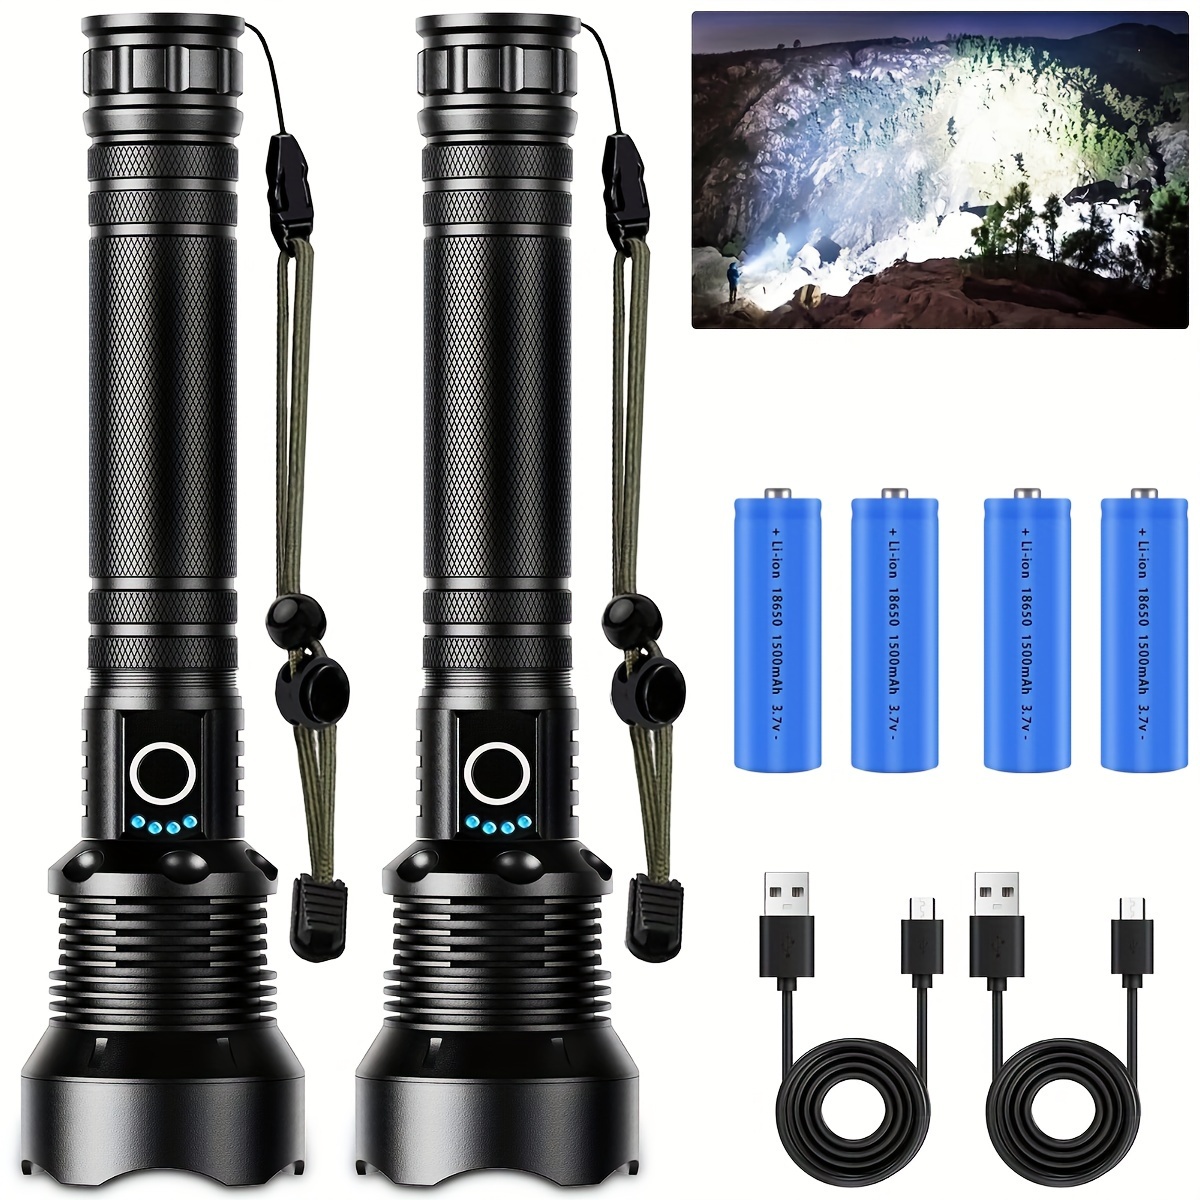 

[best Gift] 2 Pack P70 Rechargeable Led Flashlight - 900000 Lumens, Super Bright With 5 Modes, High Lumens Handheld Flashlight For Camping And Emergencies